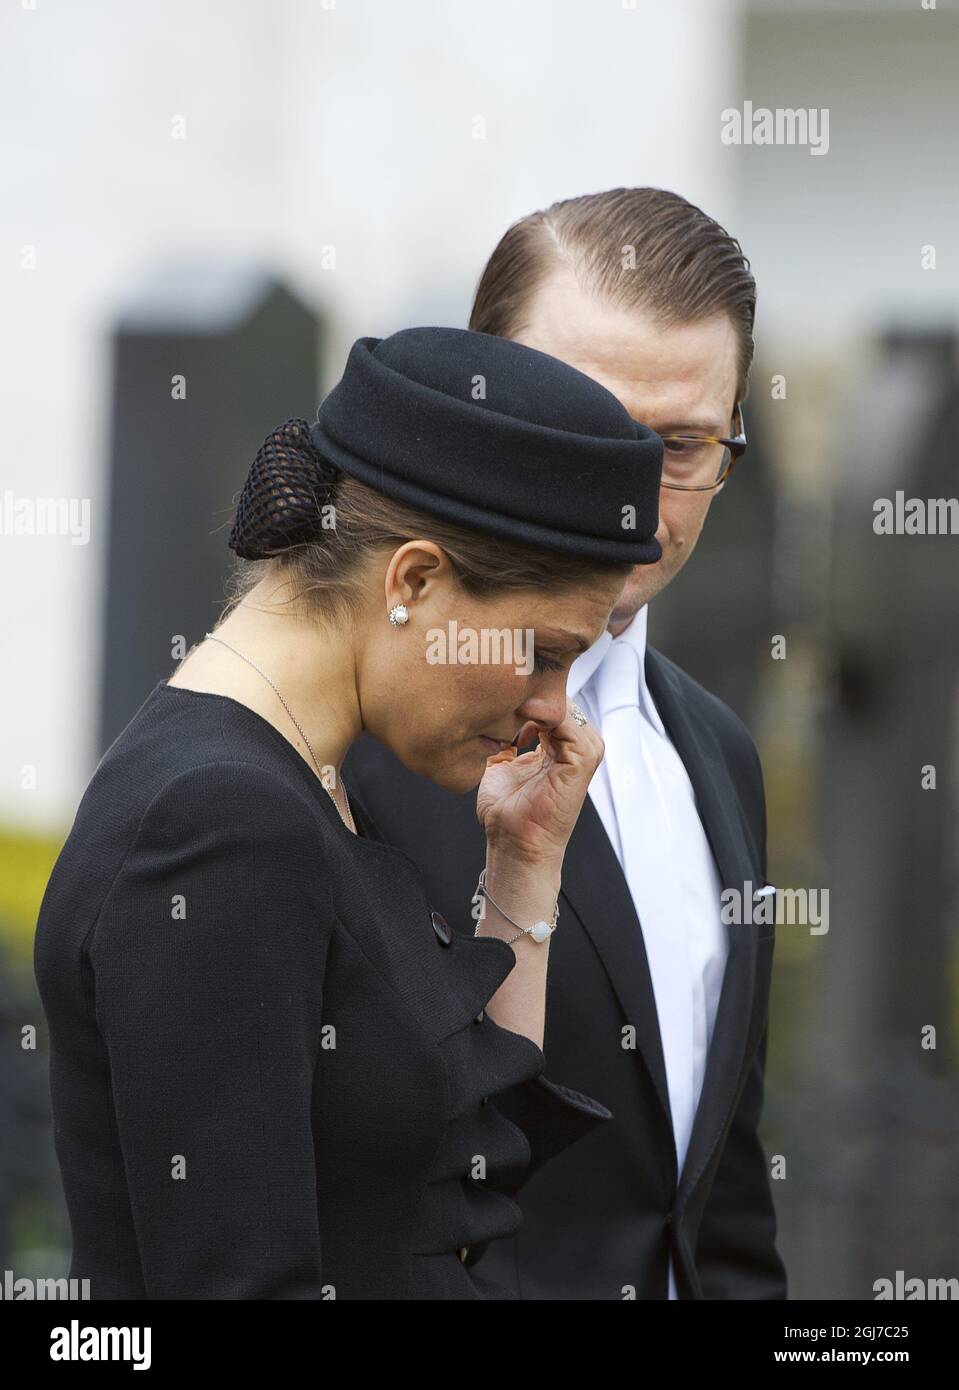 BASTAD 2012-05-14 Crown Princess Victoria and Prince Daniel of Sweden are seen during the funeral of Count Carl Johan Bernadotte in the Maria Church in Bastad, Sweden, May 14, 2012. Foto: Suvad Mrkonjic / XP / SCANPIX / kod 7116 ** OUT SWEDEN OUT T ** Stock Photo